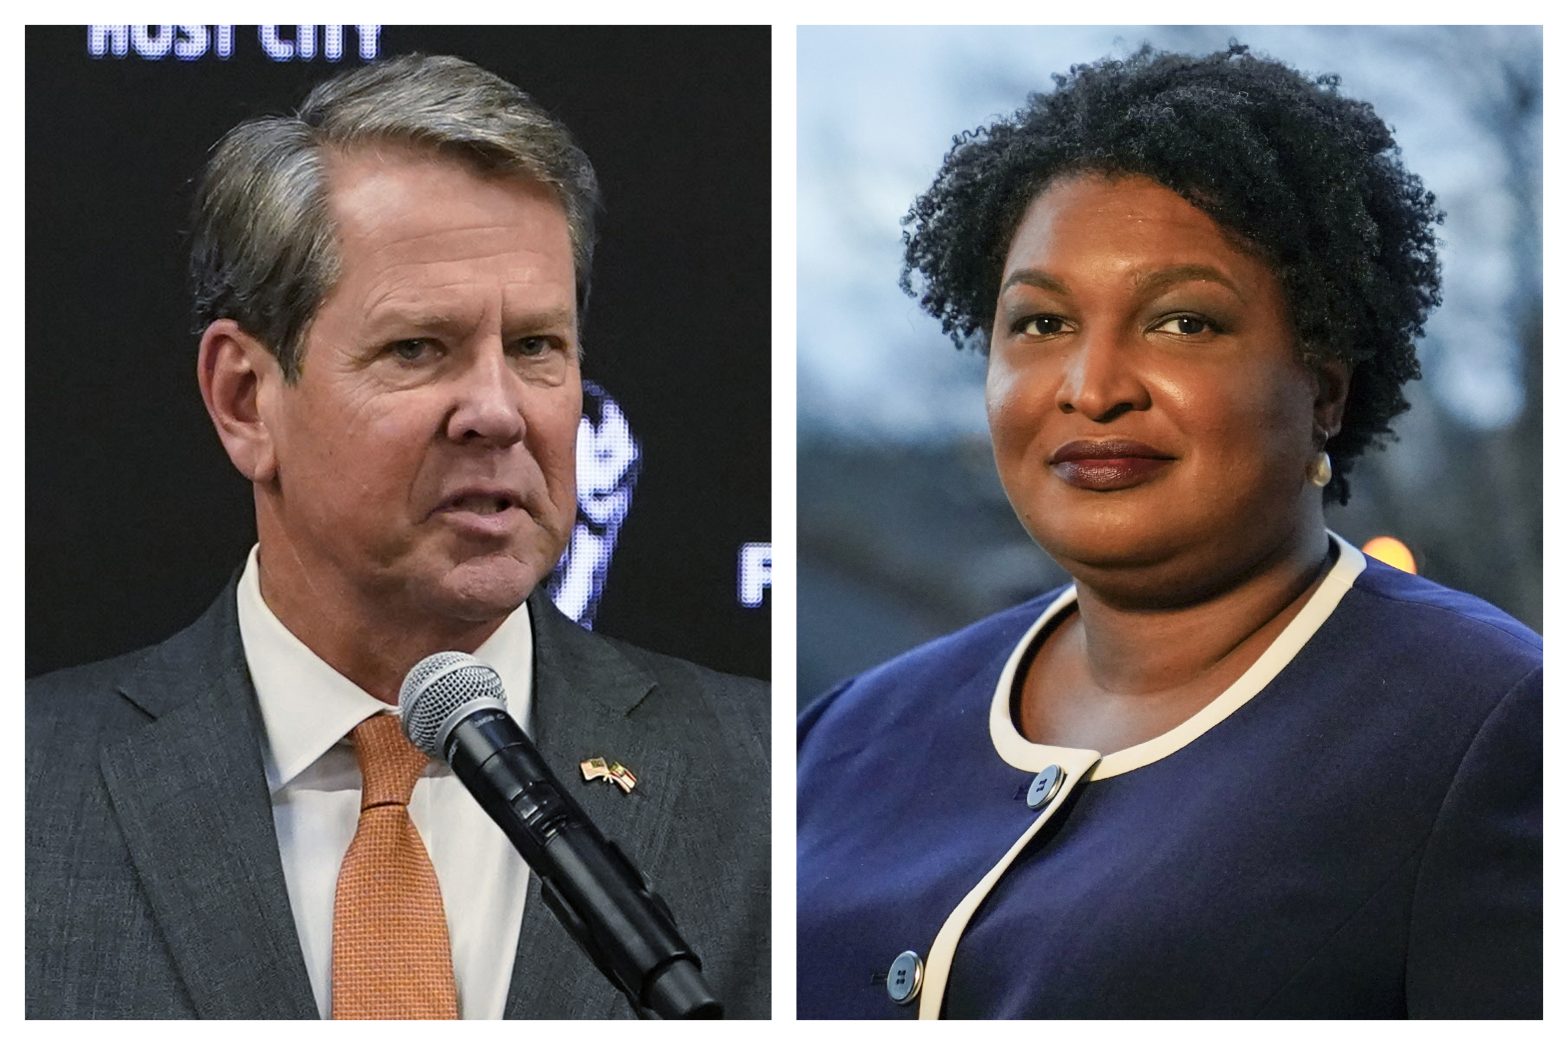 GOP Attacks Georgia’s Abrams on Voting as Judge Rejects Suit